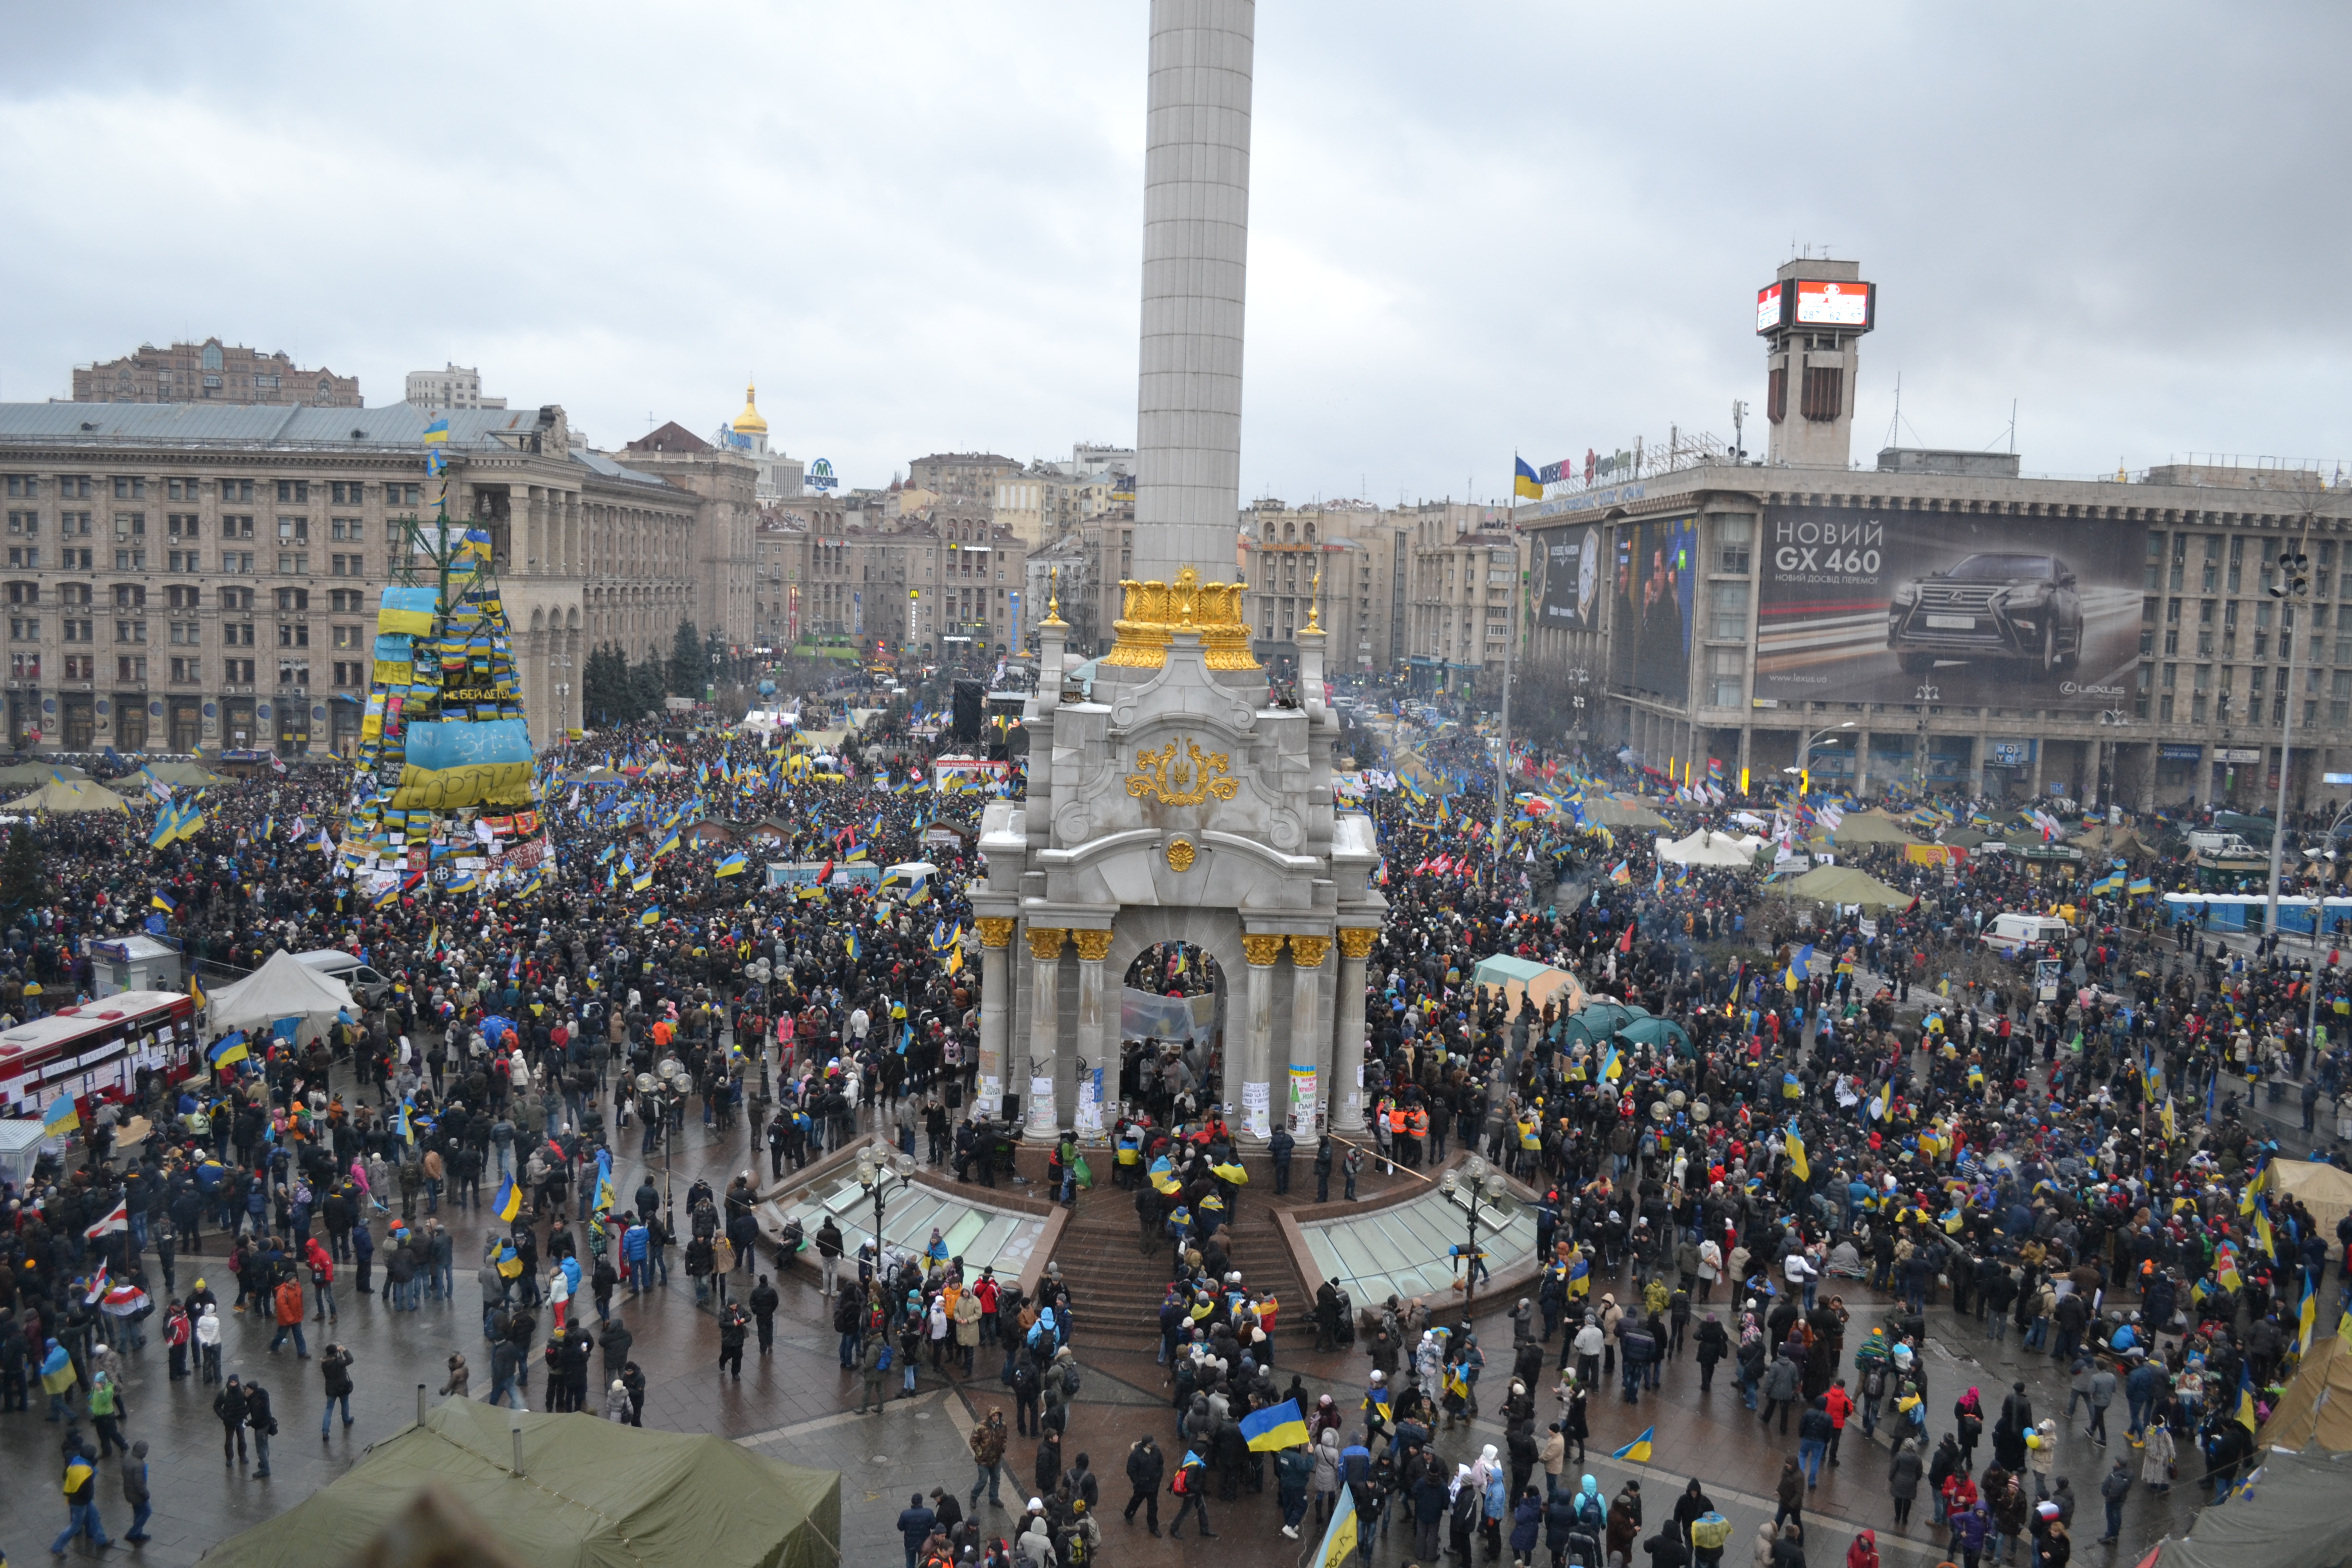 A bird’s-eye view of the occupied Maidan on December 8, 2013.